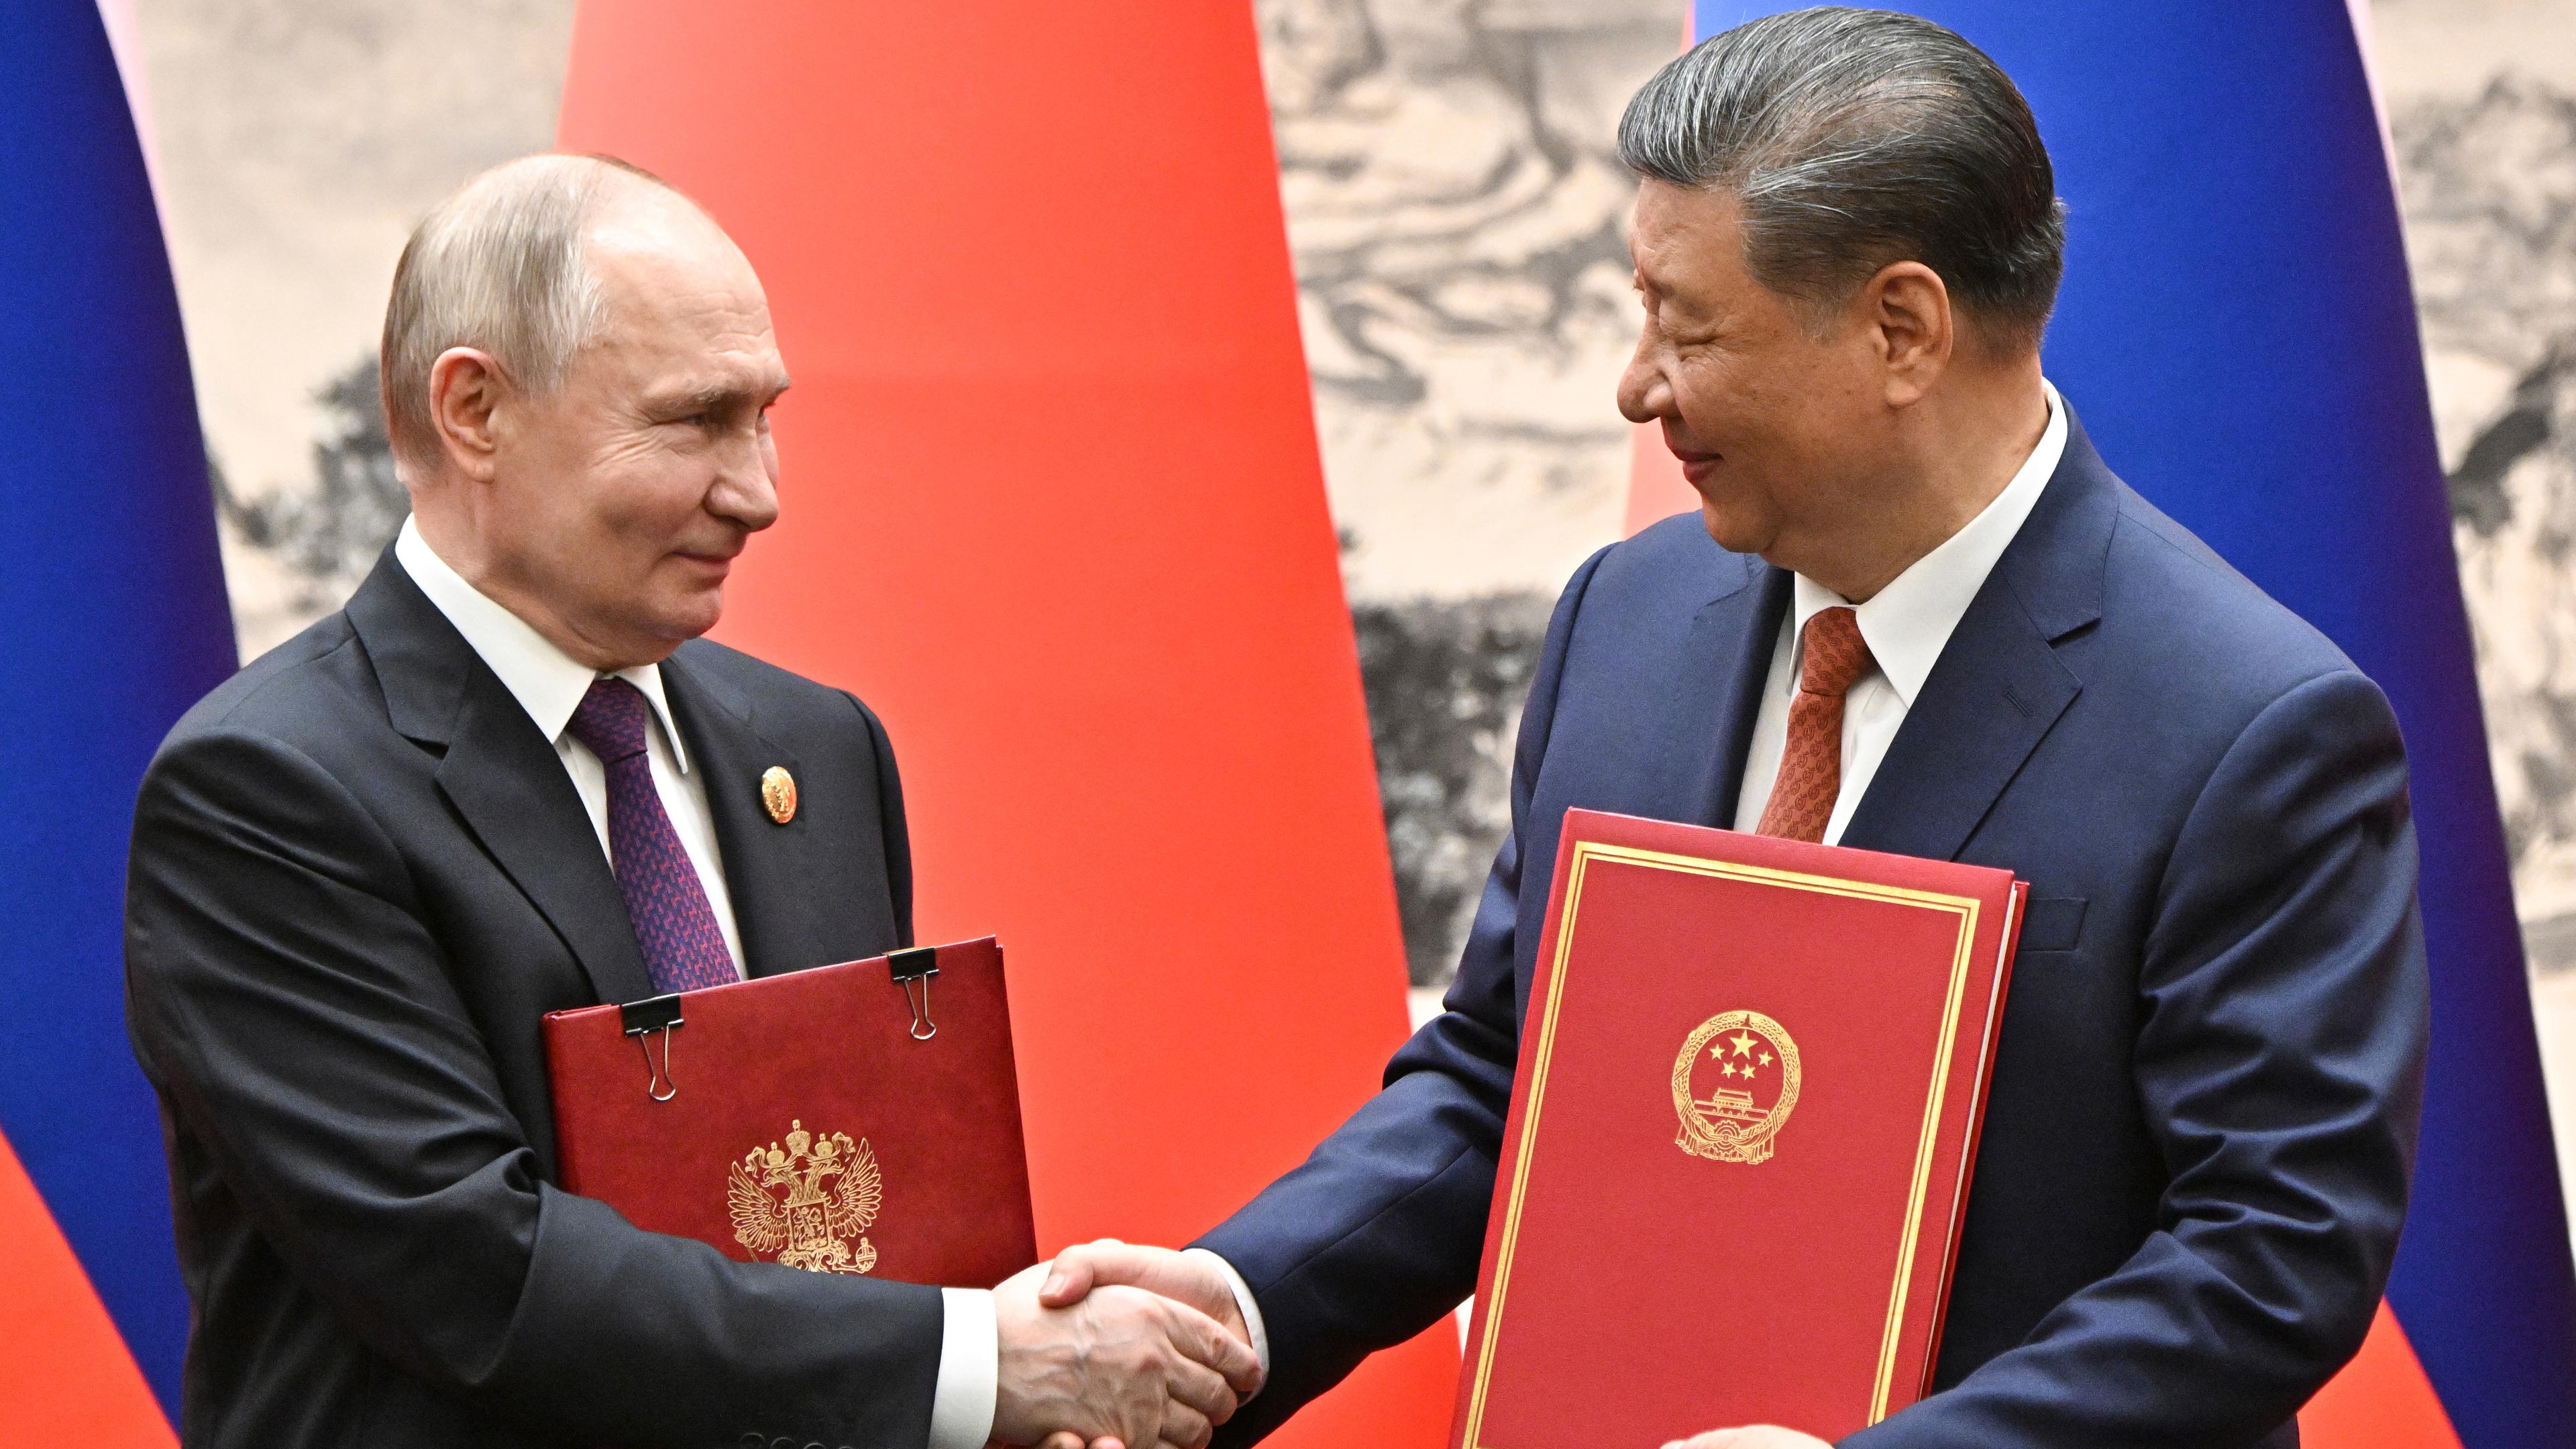 Chinese President Xi Jinping, right, and Russian President Vladimir Putin attend a signing ceremony in Beijing, China, on Thursday